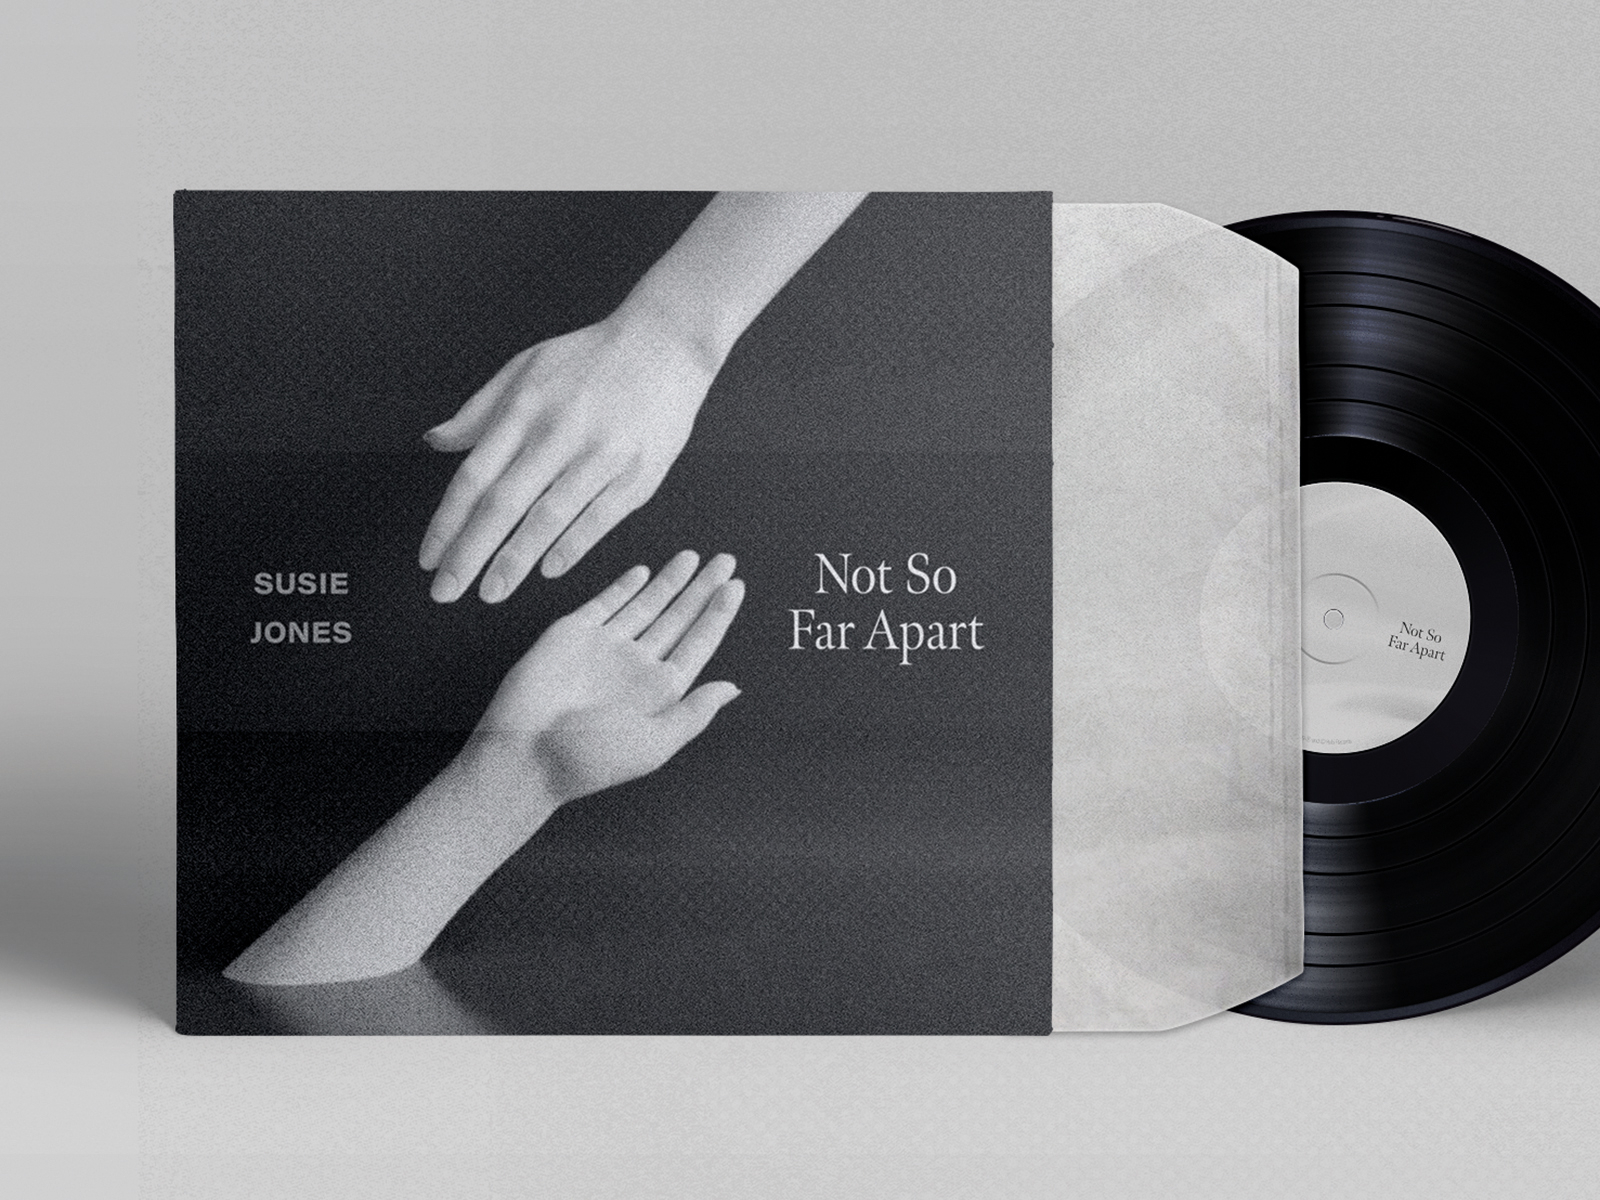 Download Not So Far Apart Album Cover By Alex On Dribbble PSD Mockup Templates